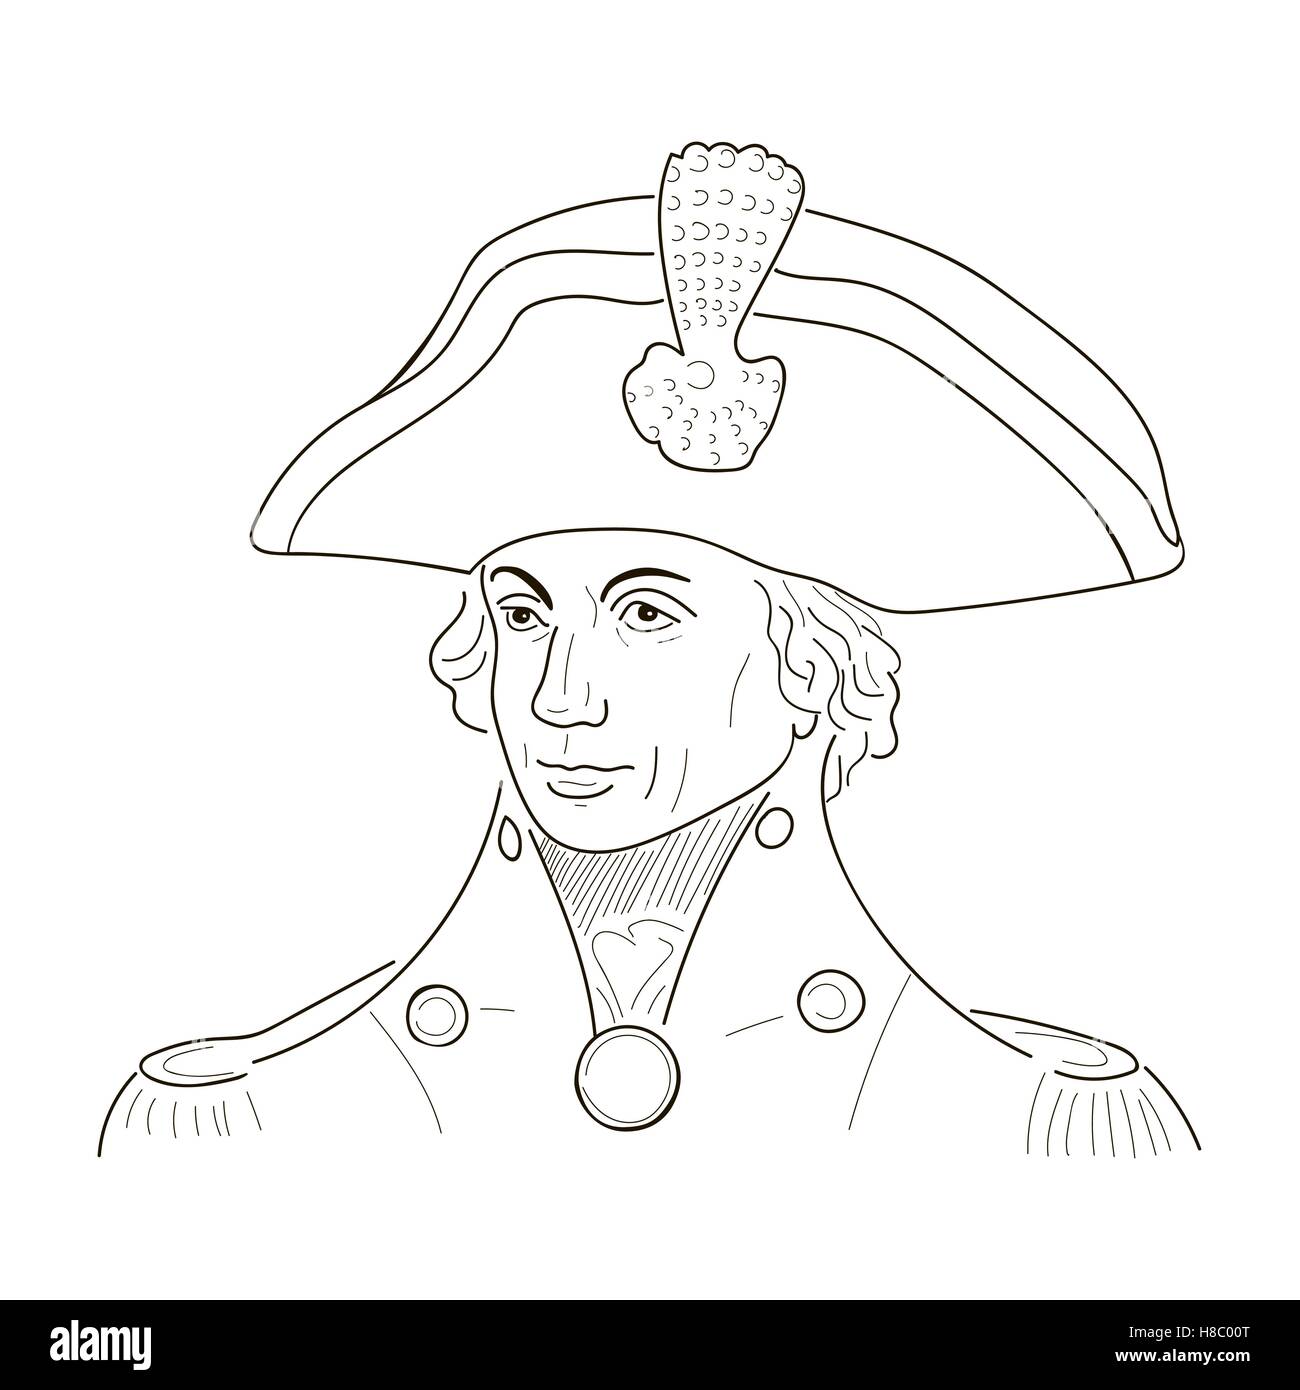 Vice Admiral Horatio Lord Nelson. Sketch illustration. Vector Stock Vector